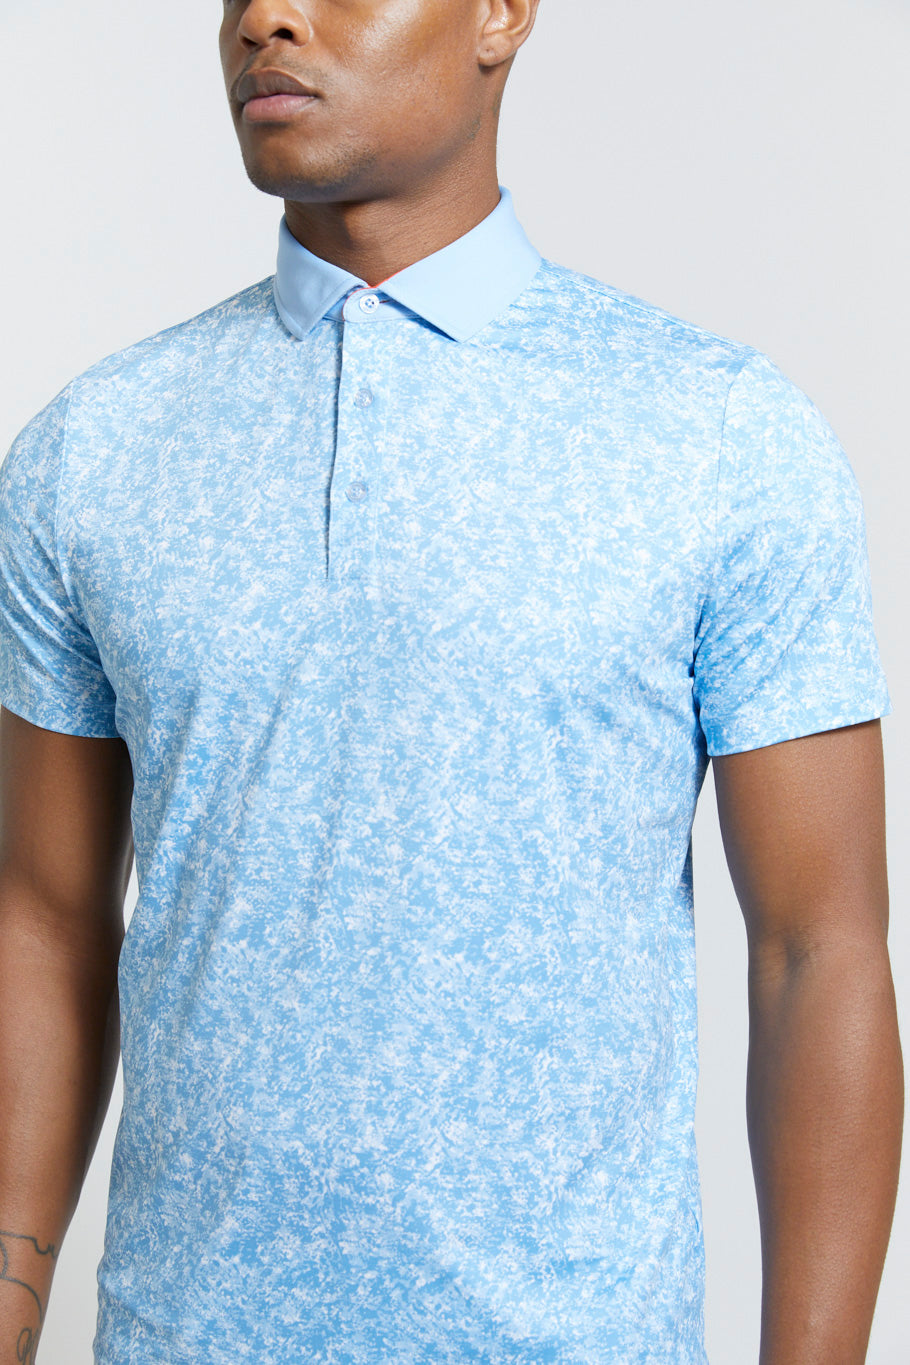 Image of the maxwell polo in skydiver ss23